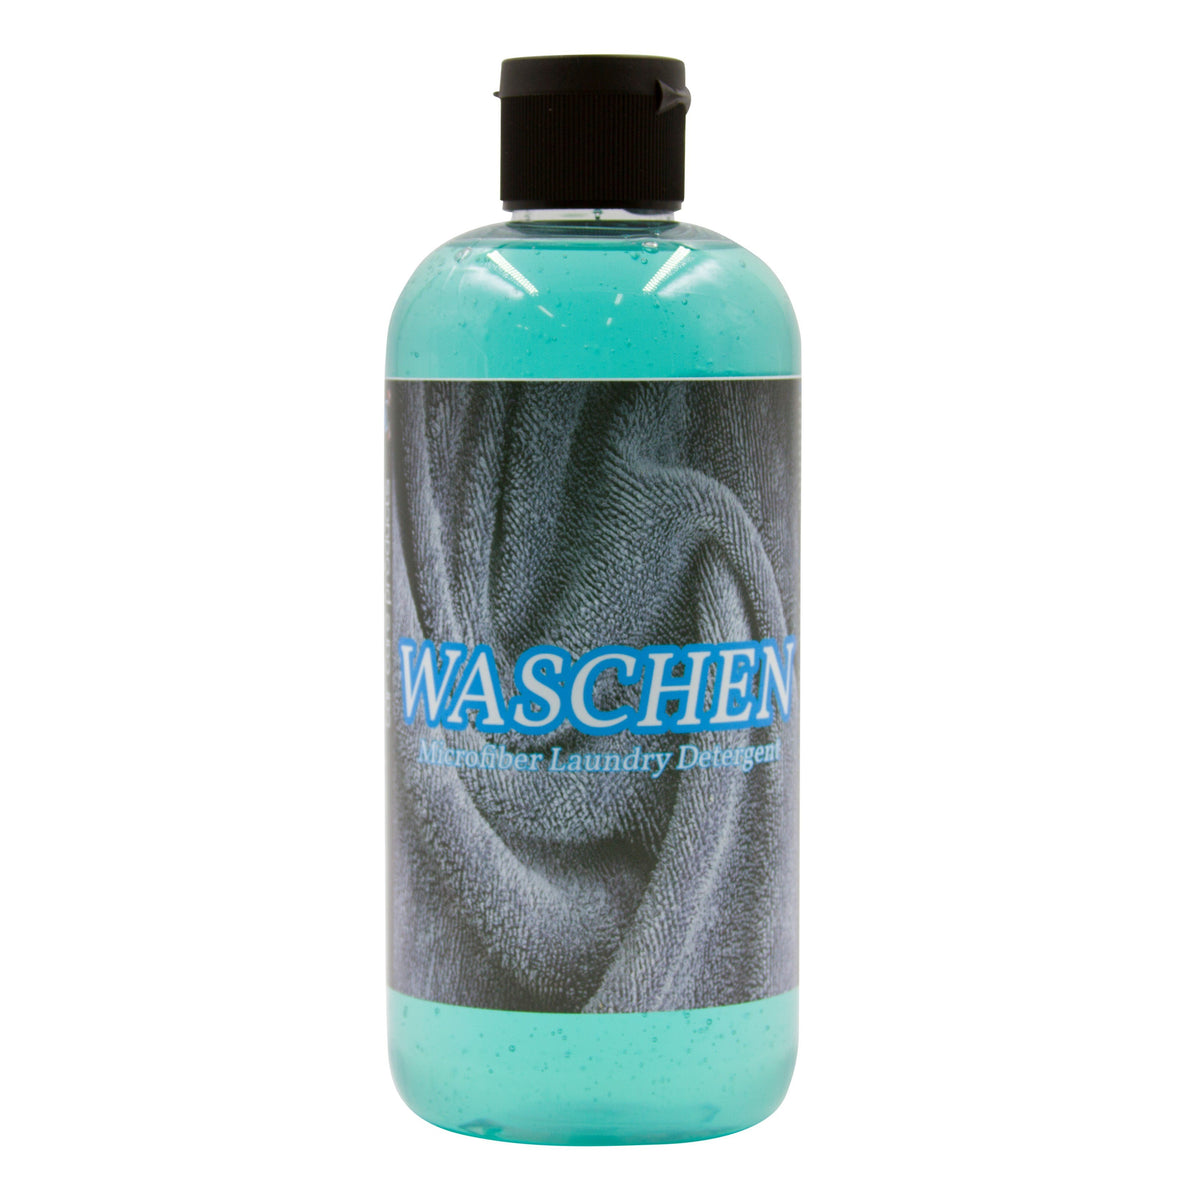 Waschen Microfiber Laundry Detergent – Greenway's Car Care Products